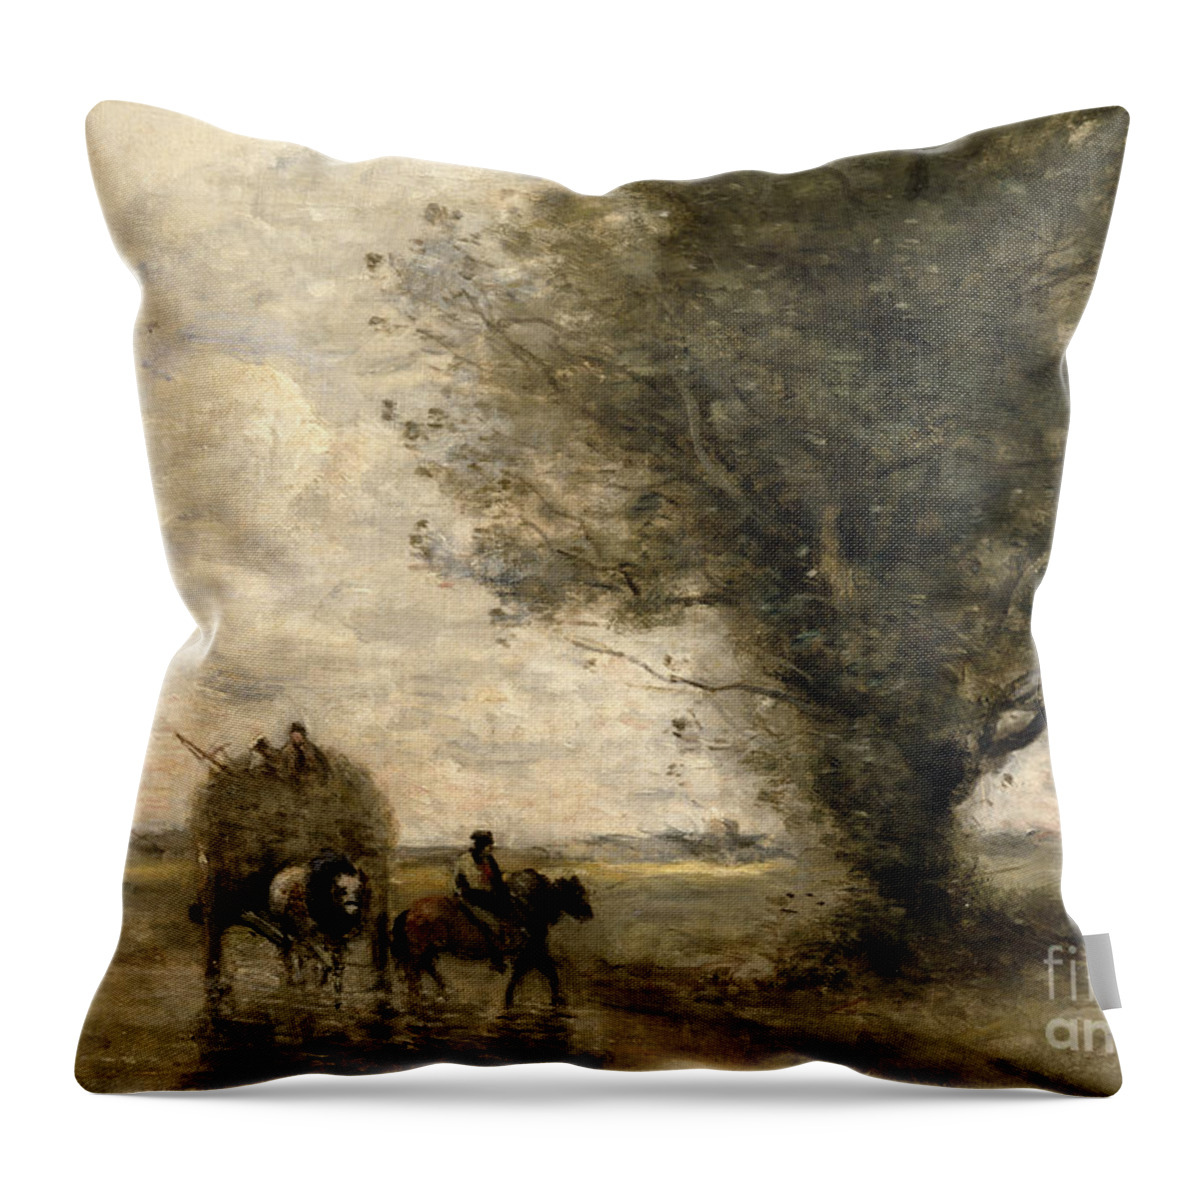 The Throw Pillow featuring the painting The Haycart by Jean Baptiste Camille Corot